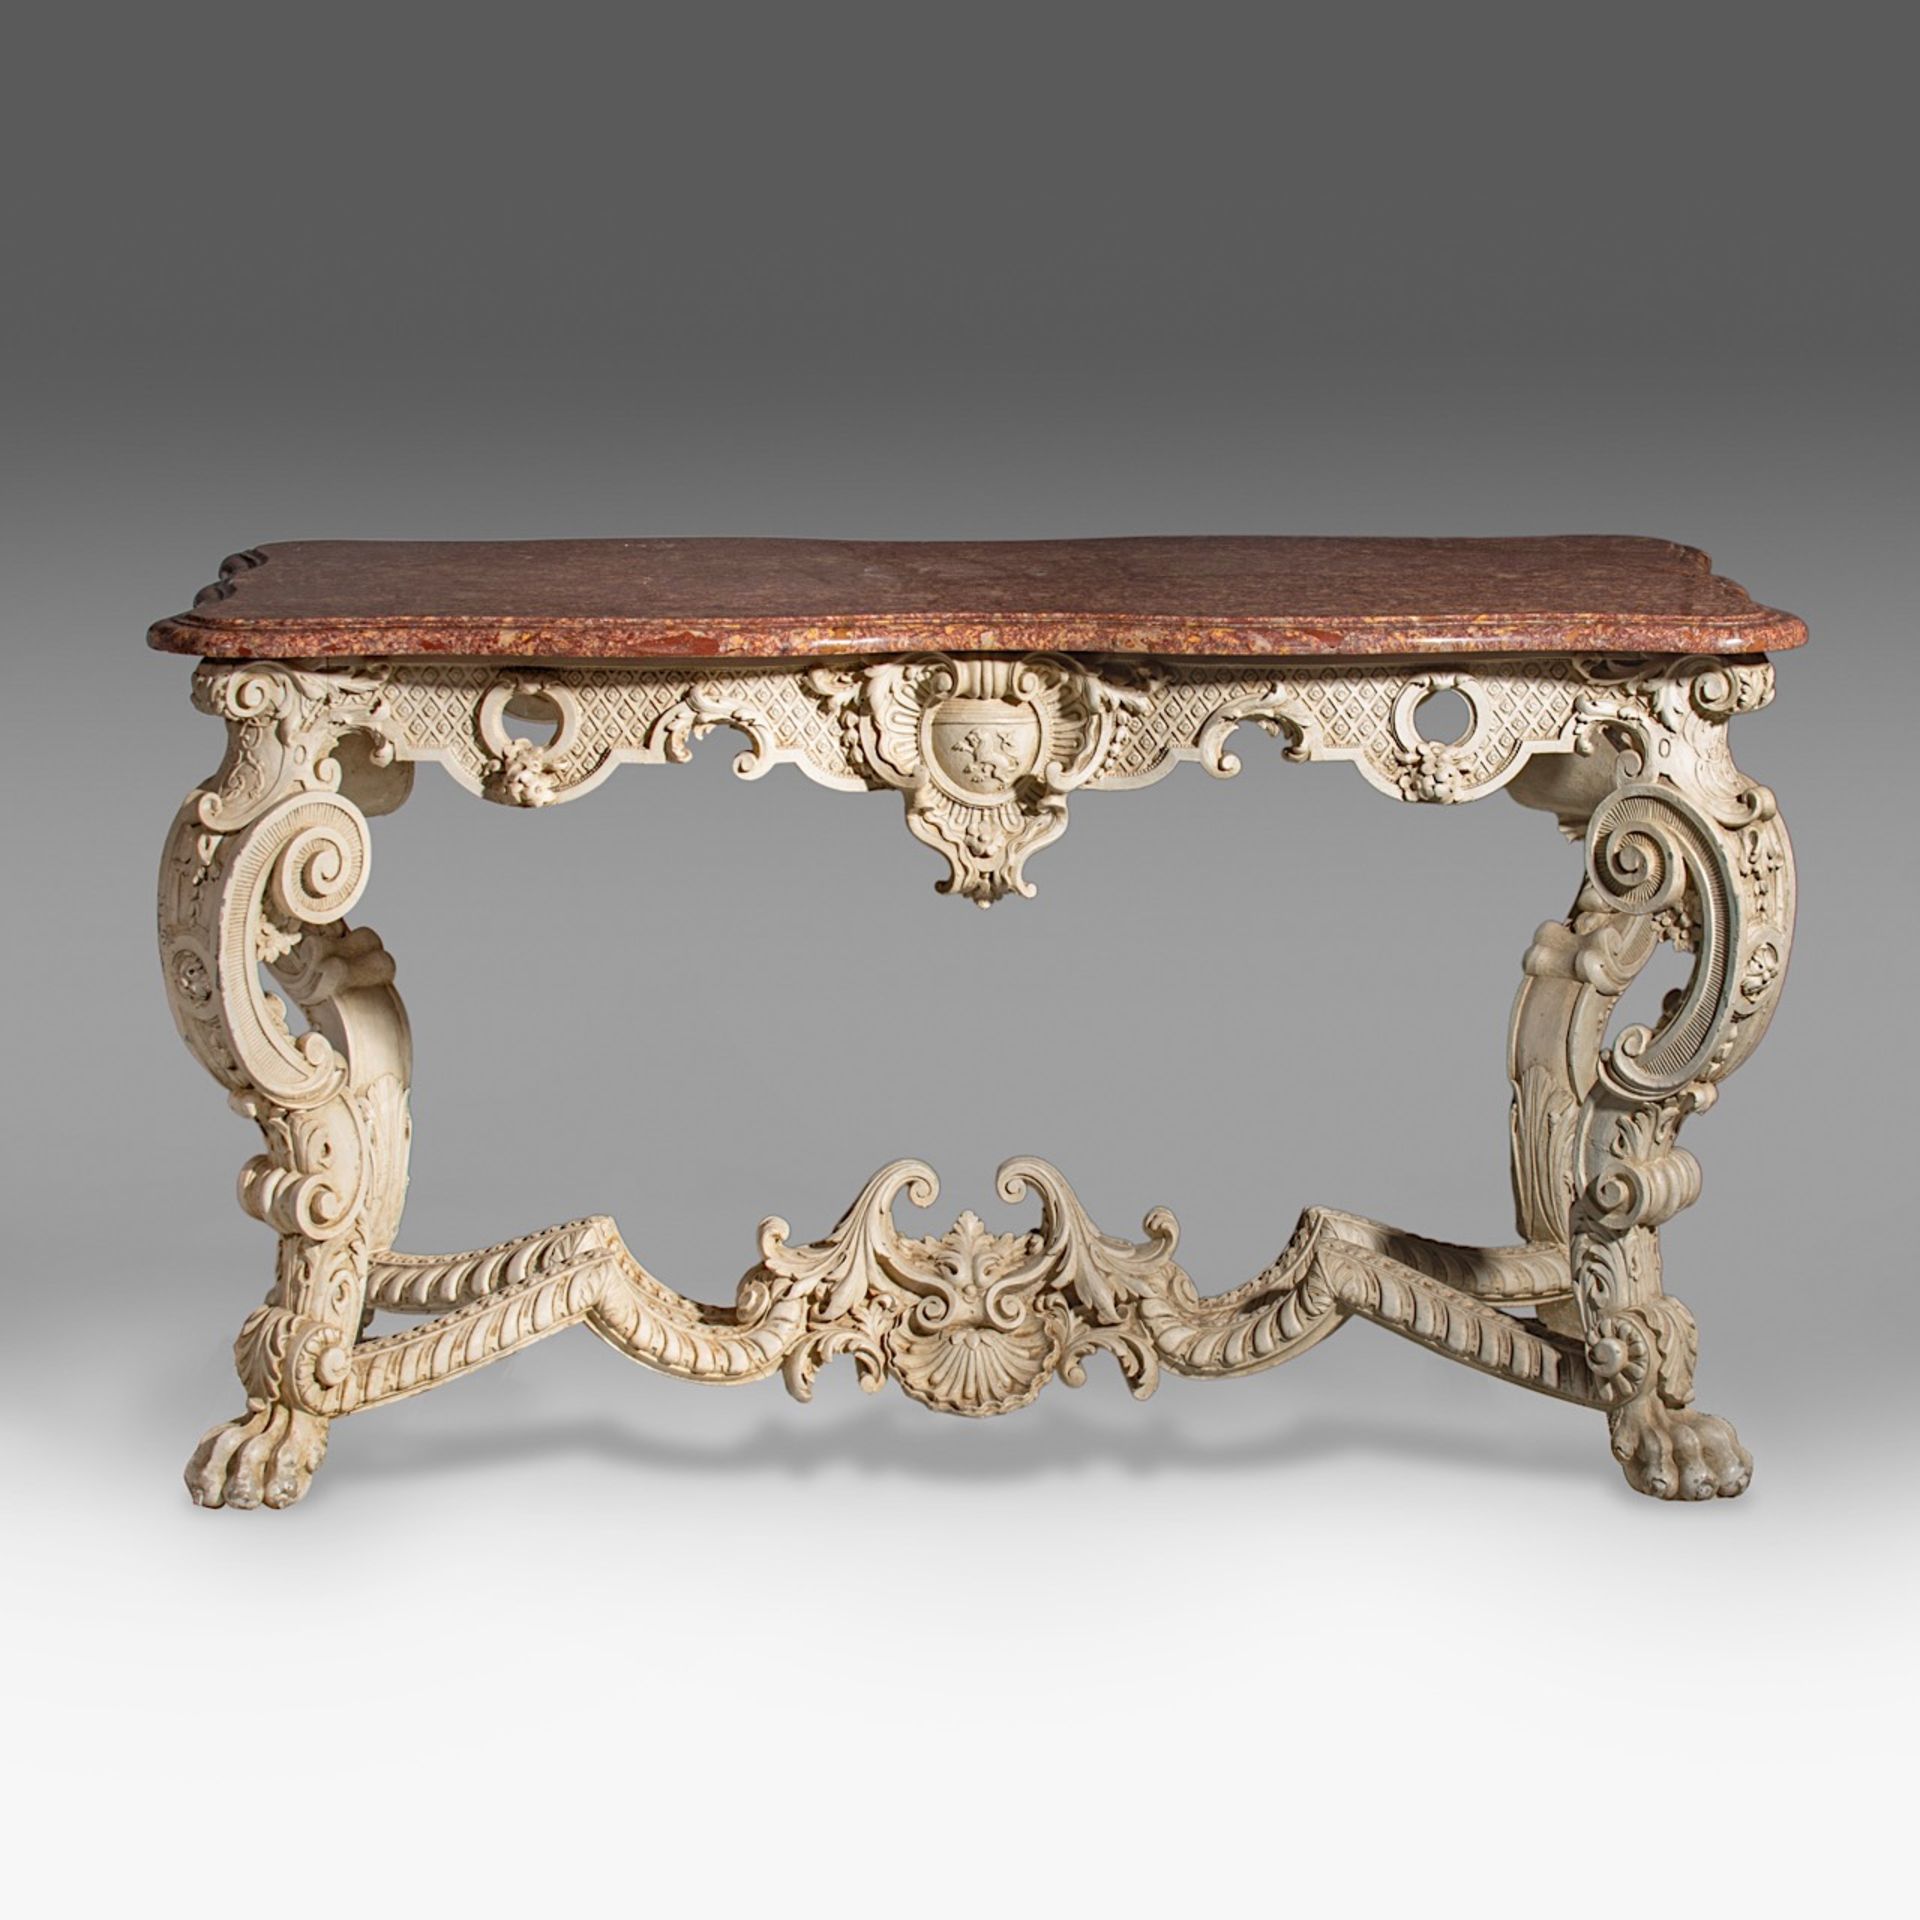 An imposing Louis XIV-style 'console de milieu' with a brocatelle marble, 19thC, H 81,5 - W 147 - D - Image 2 of 11